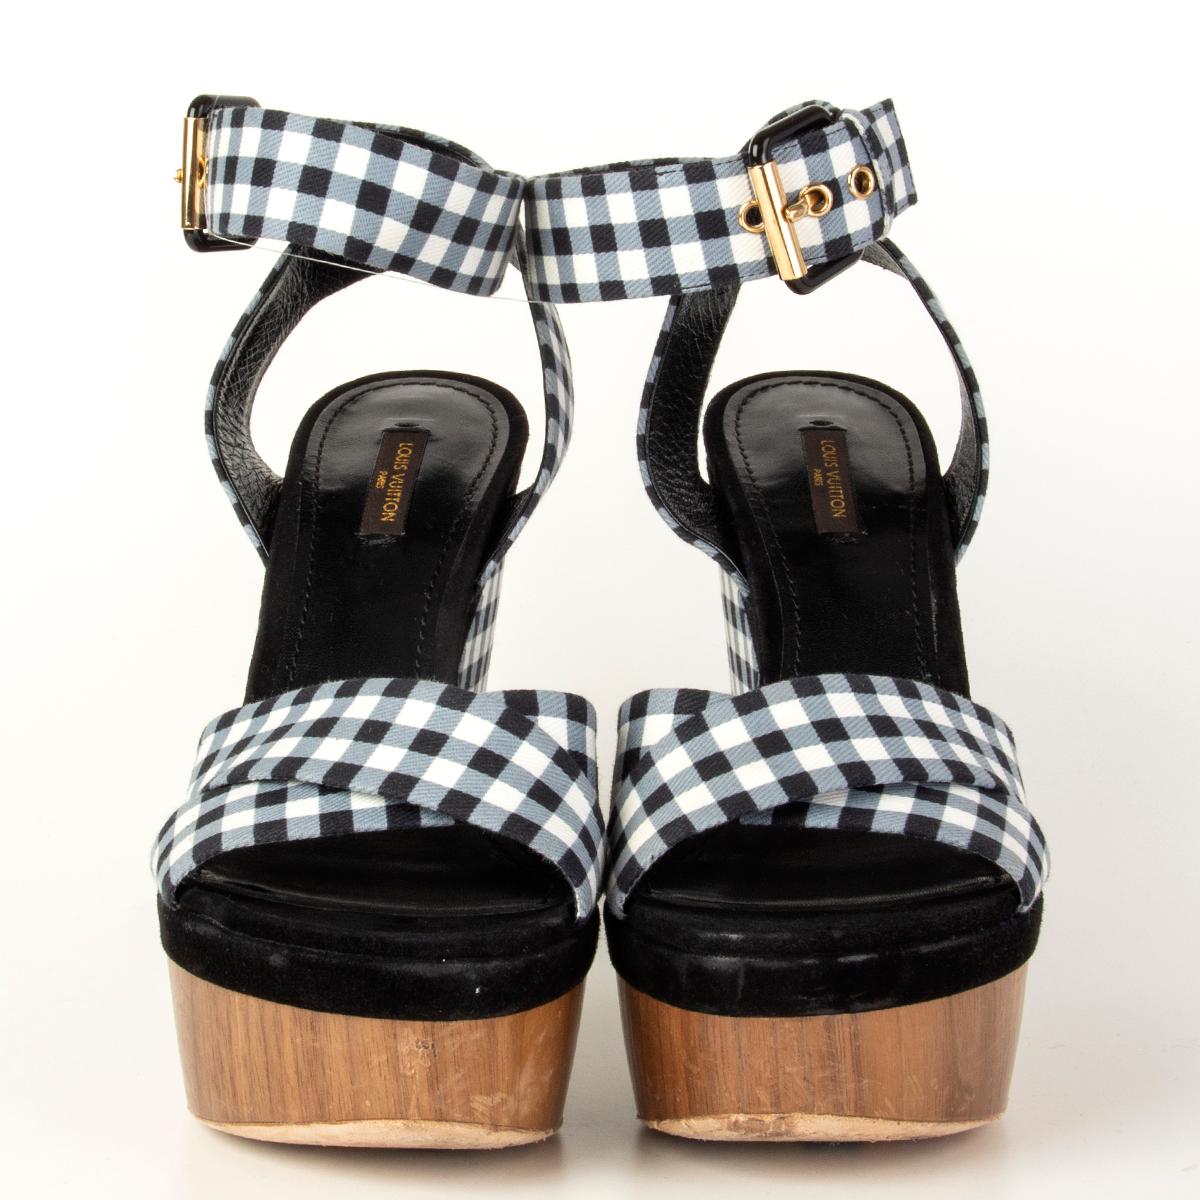 100% authentic Louis Vuitton gingham wedge sandals designed with blue and white gingham check straps with ankle-strap buckle fastening featuring wooden platform front and combination of a wedge and clog heel. Have been worn with a dent on the left